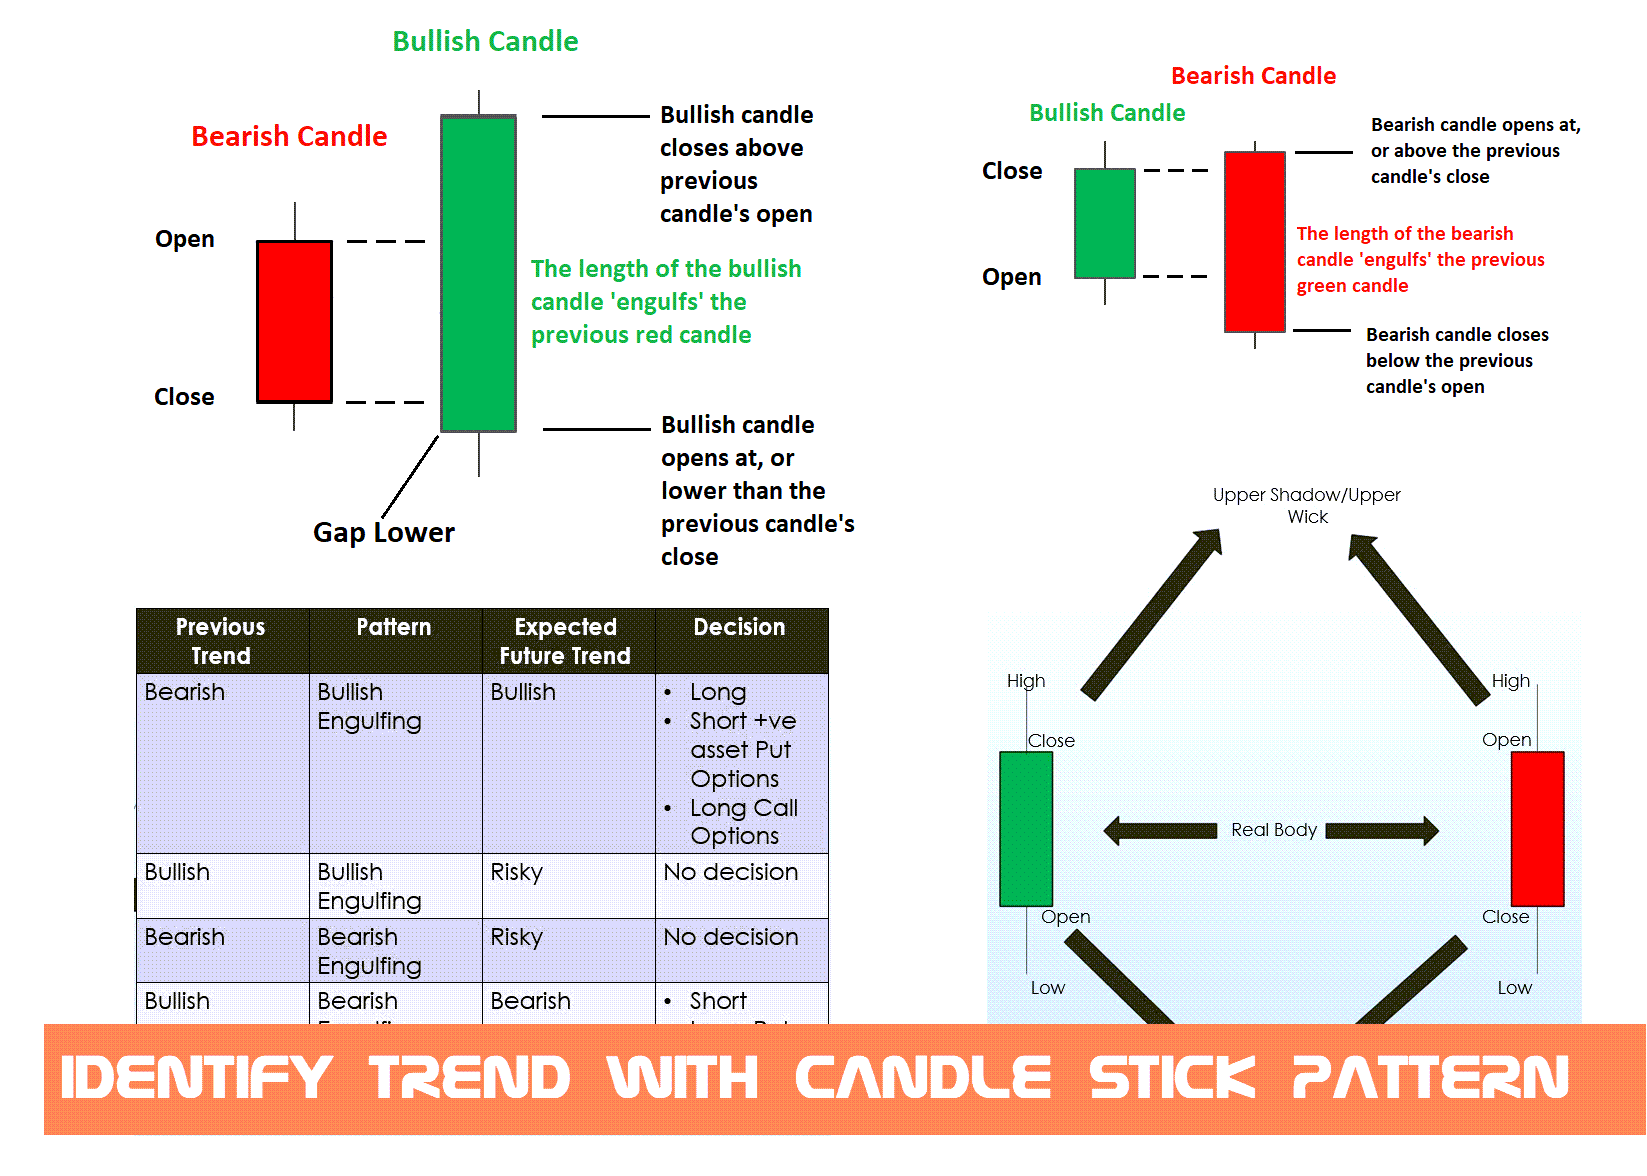 vchart MT4 - MT5 CHART Identify trend with candle stick pattern